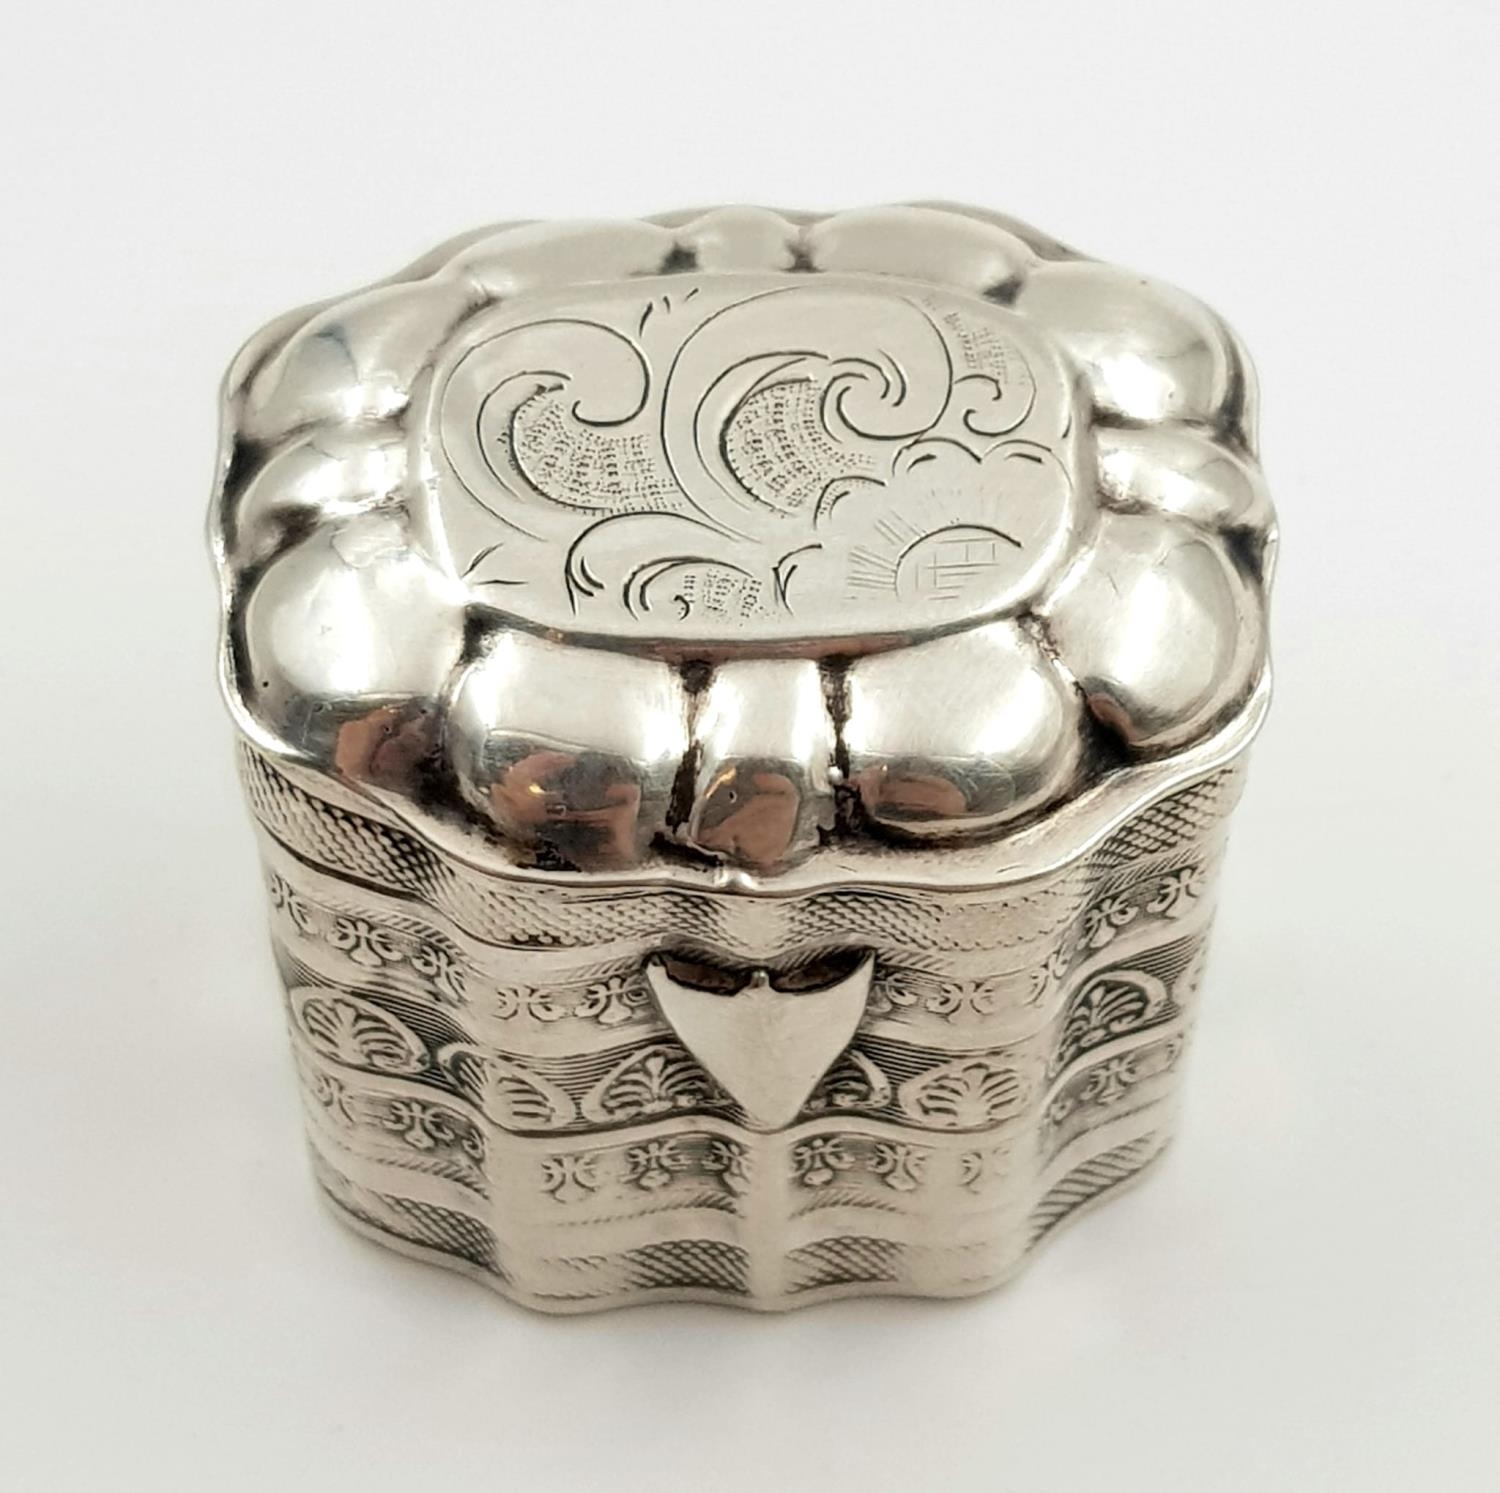 Antique (1870s) Silver Hallmarked Dutch Pill/Snuff Box. Beautifully engraved. 38mm tall. 20.5g. - Image 4 of 6